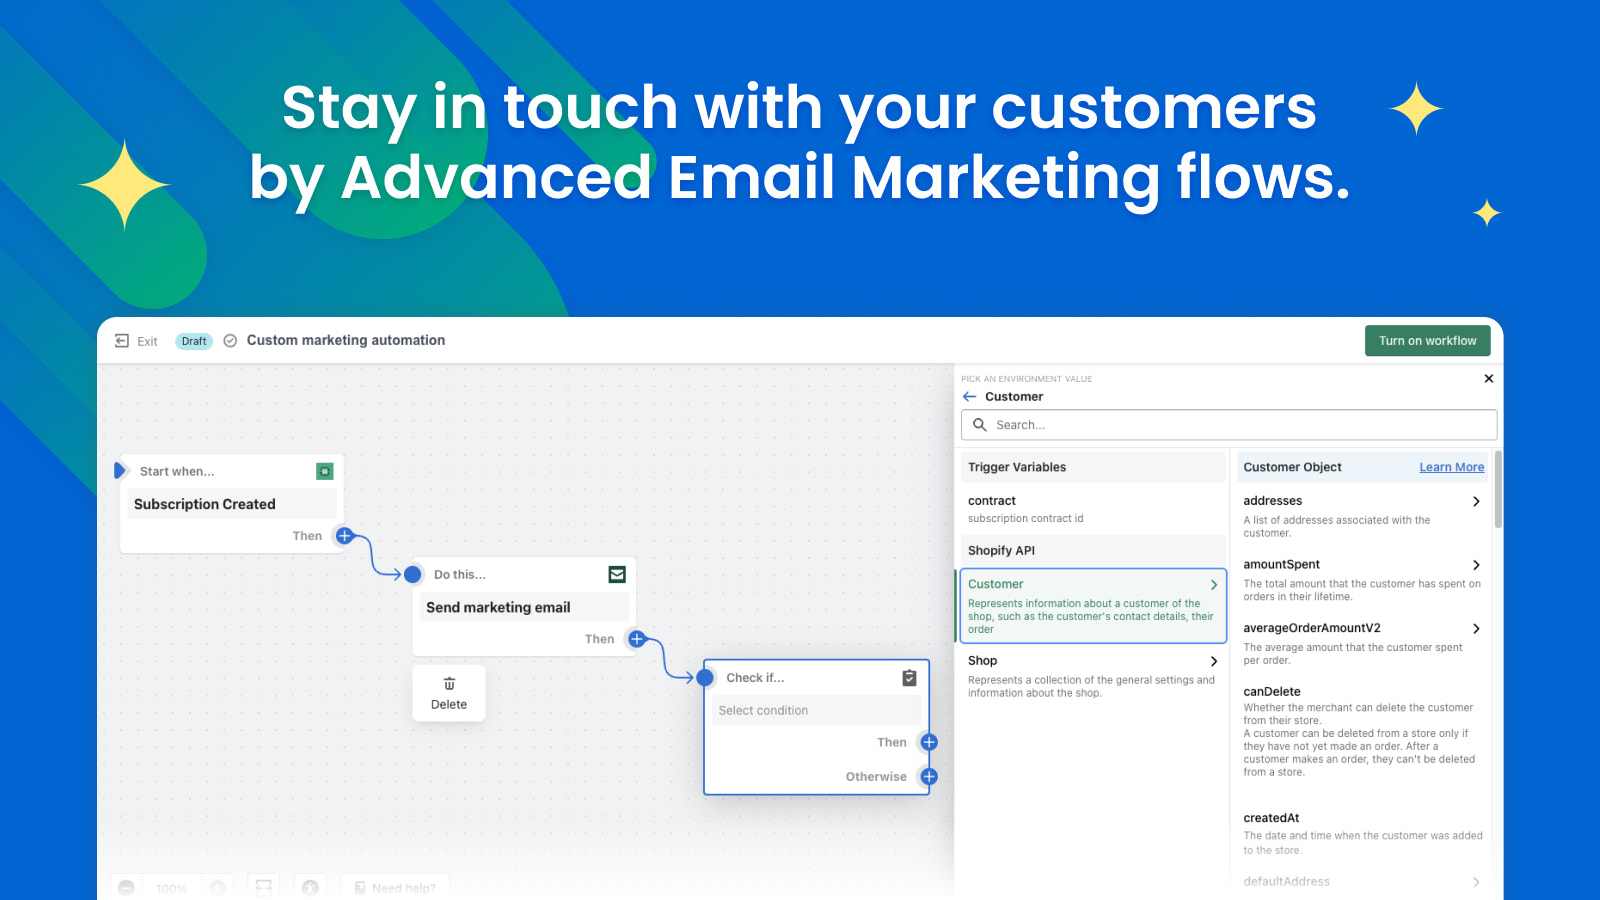 Advanced email marketing flows for customer retention